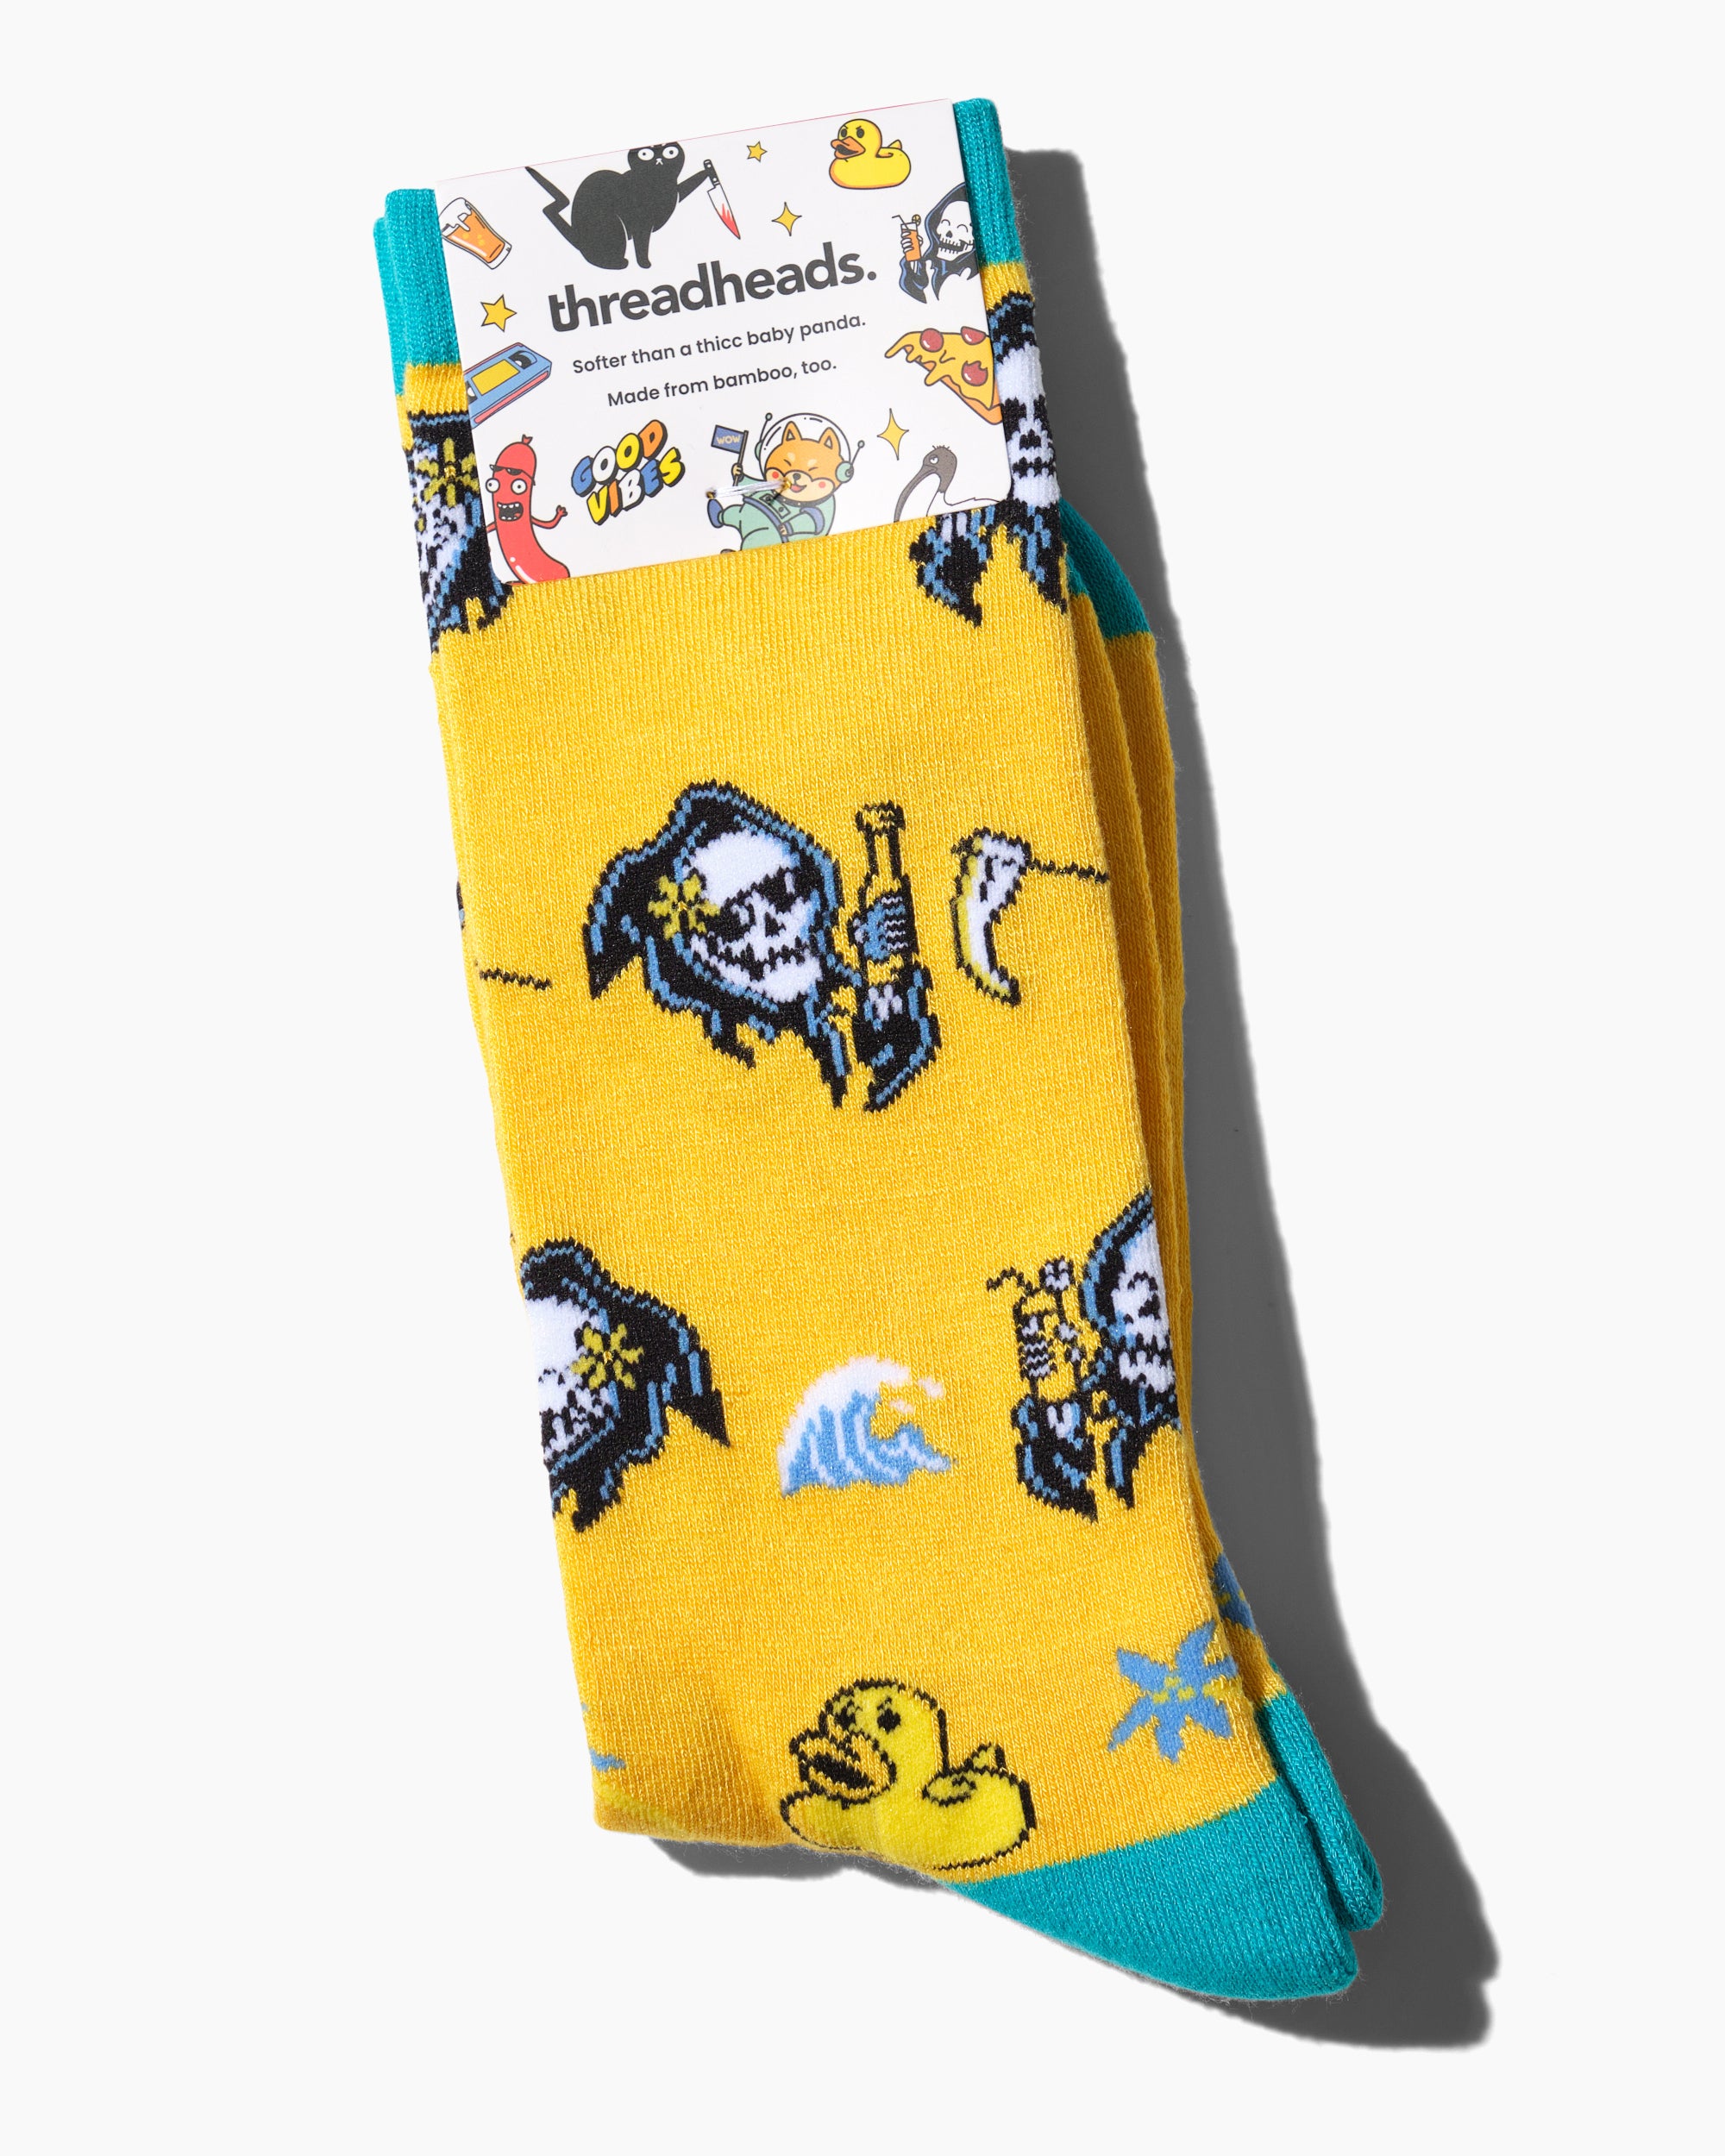 Rubber Ducky and The Reaper Socks